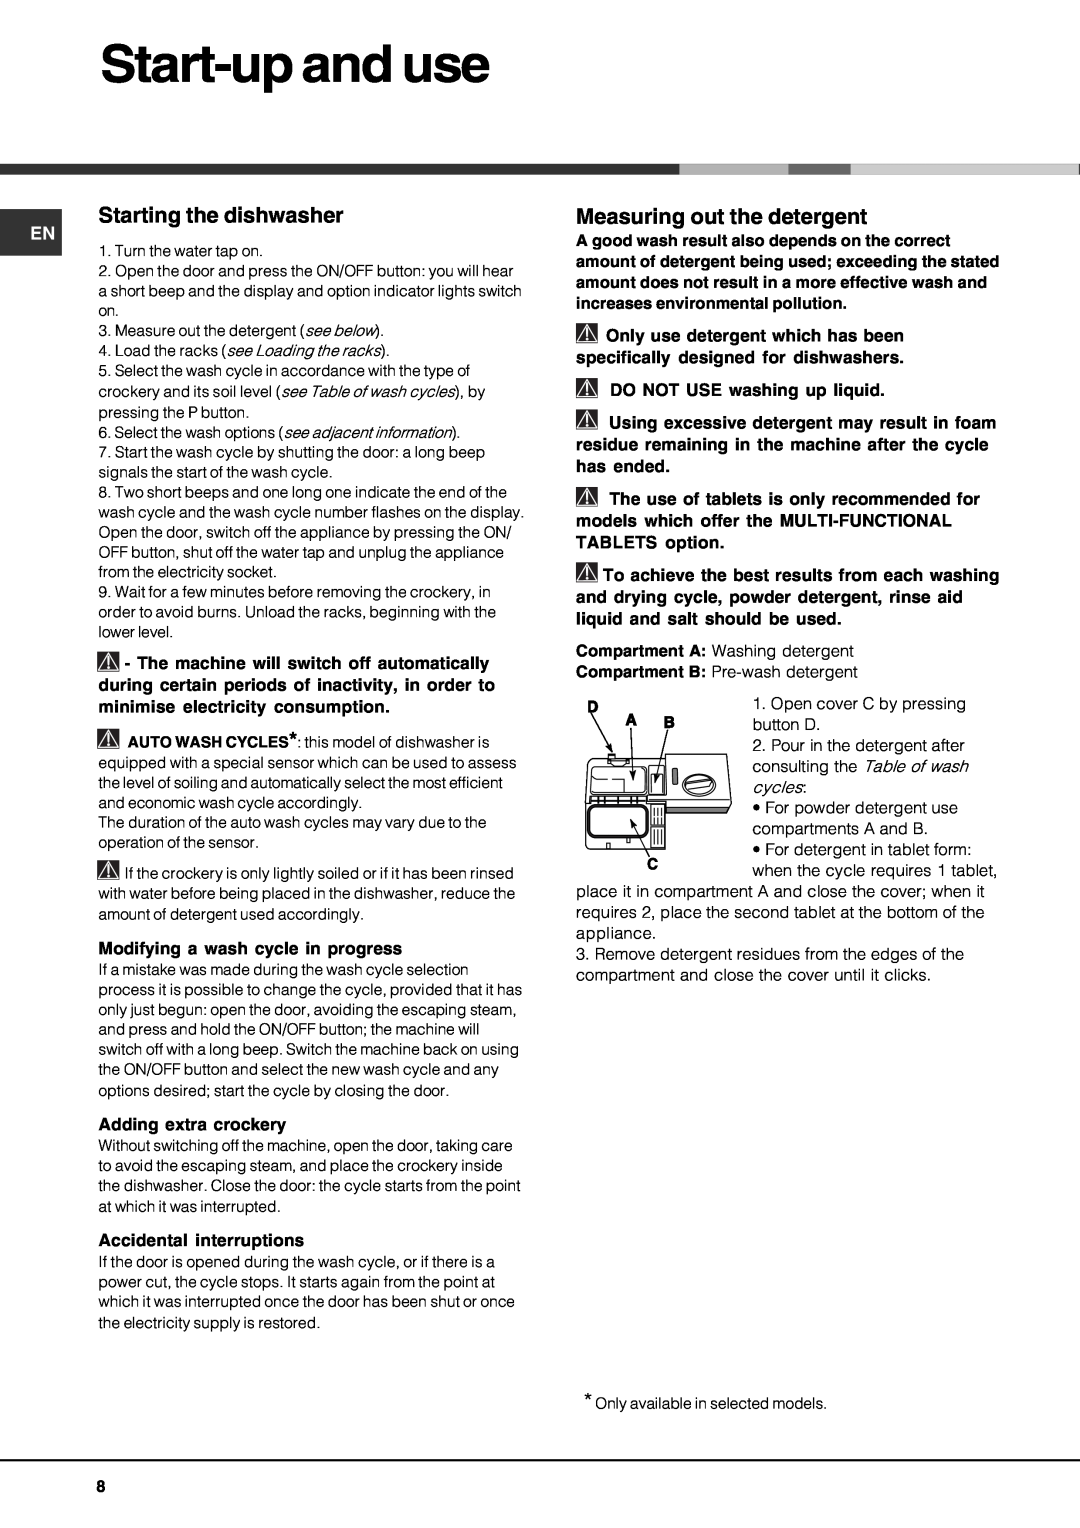 Hotpoint lft 3214 manual Start-upand use, Starting the dishwasher, Measuring out the detergent 